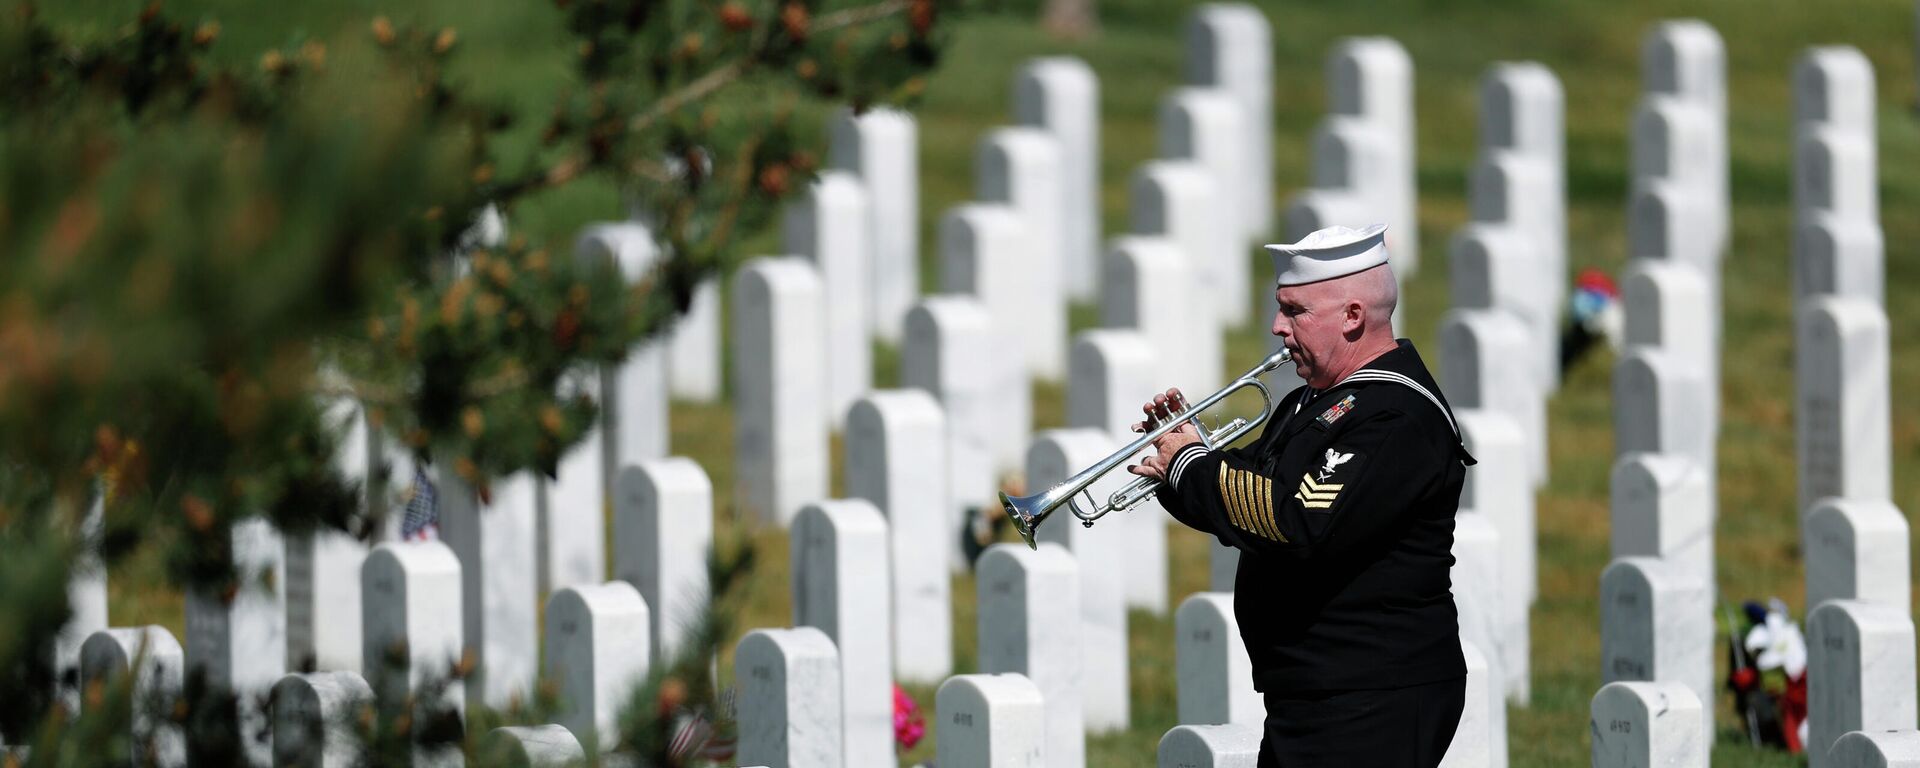 Retired U.S. Navy Yeoman First Class Mark Stallins plays Taps for Memorial Day at a gravesite in Fort Logan National Cemetery Monday, May 25, 2020, in Sheridan, Colo. - Sputnik International, 1920, 14.10.2021